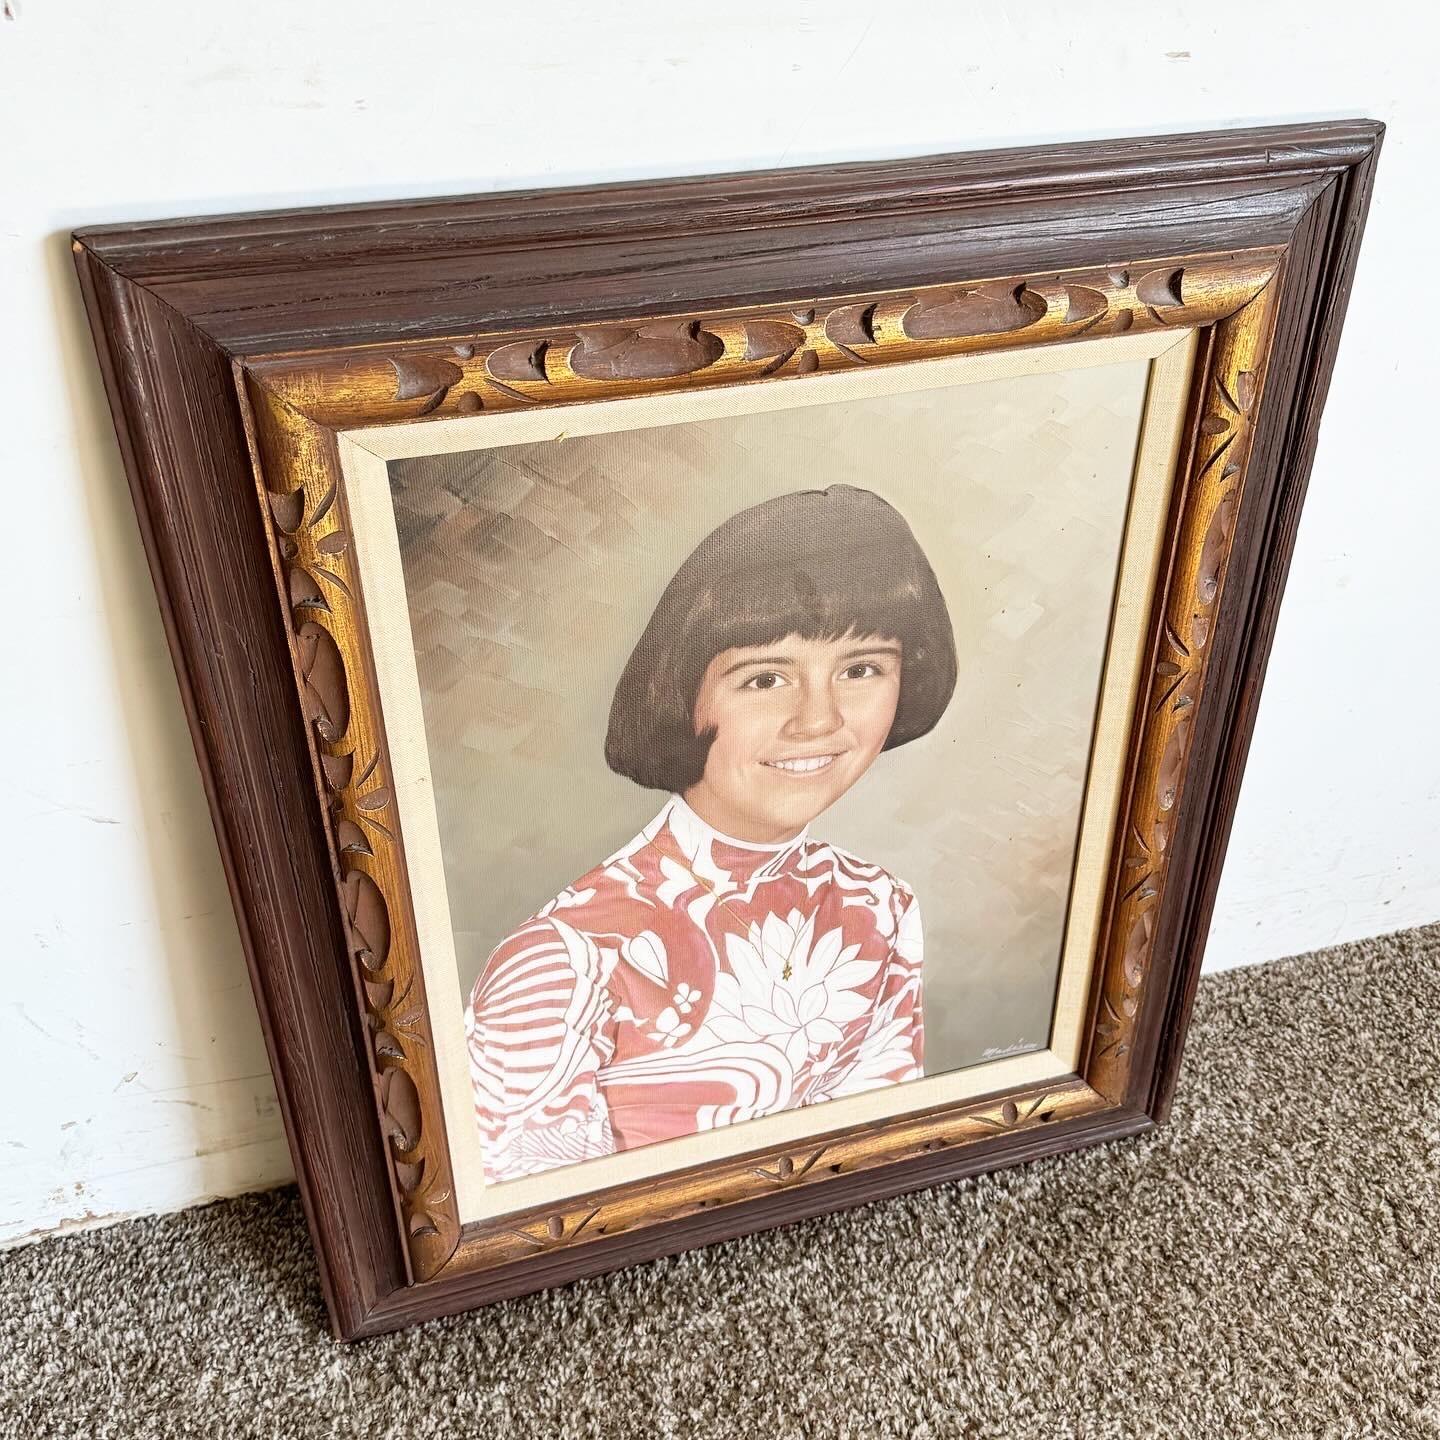 Experience the beauty of the Vintage Mid Century Painted Photograph Portrait of a Young Jewish Woman, a masterpiece blending photography and hand painting. This portrait captures the essence of cultural heritage and femininity, showcasing